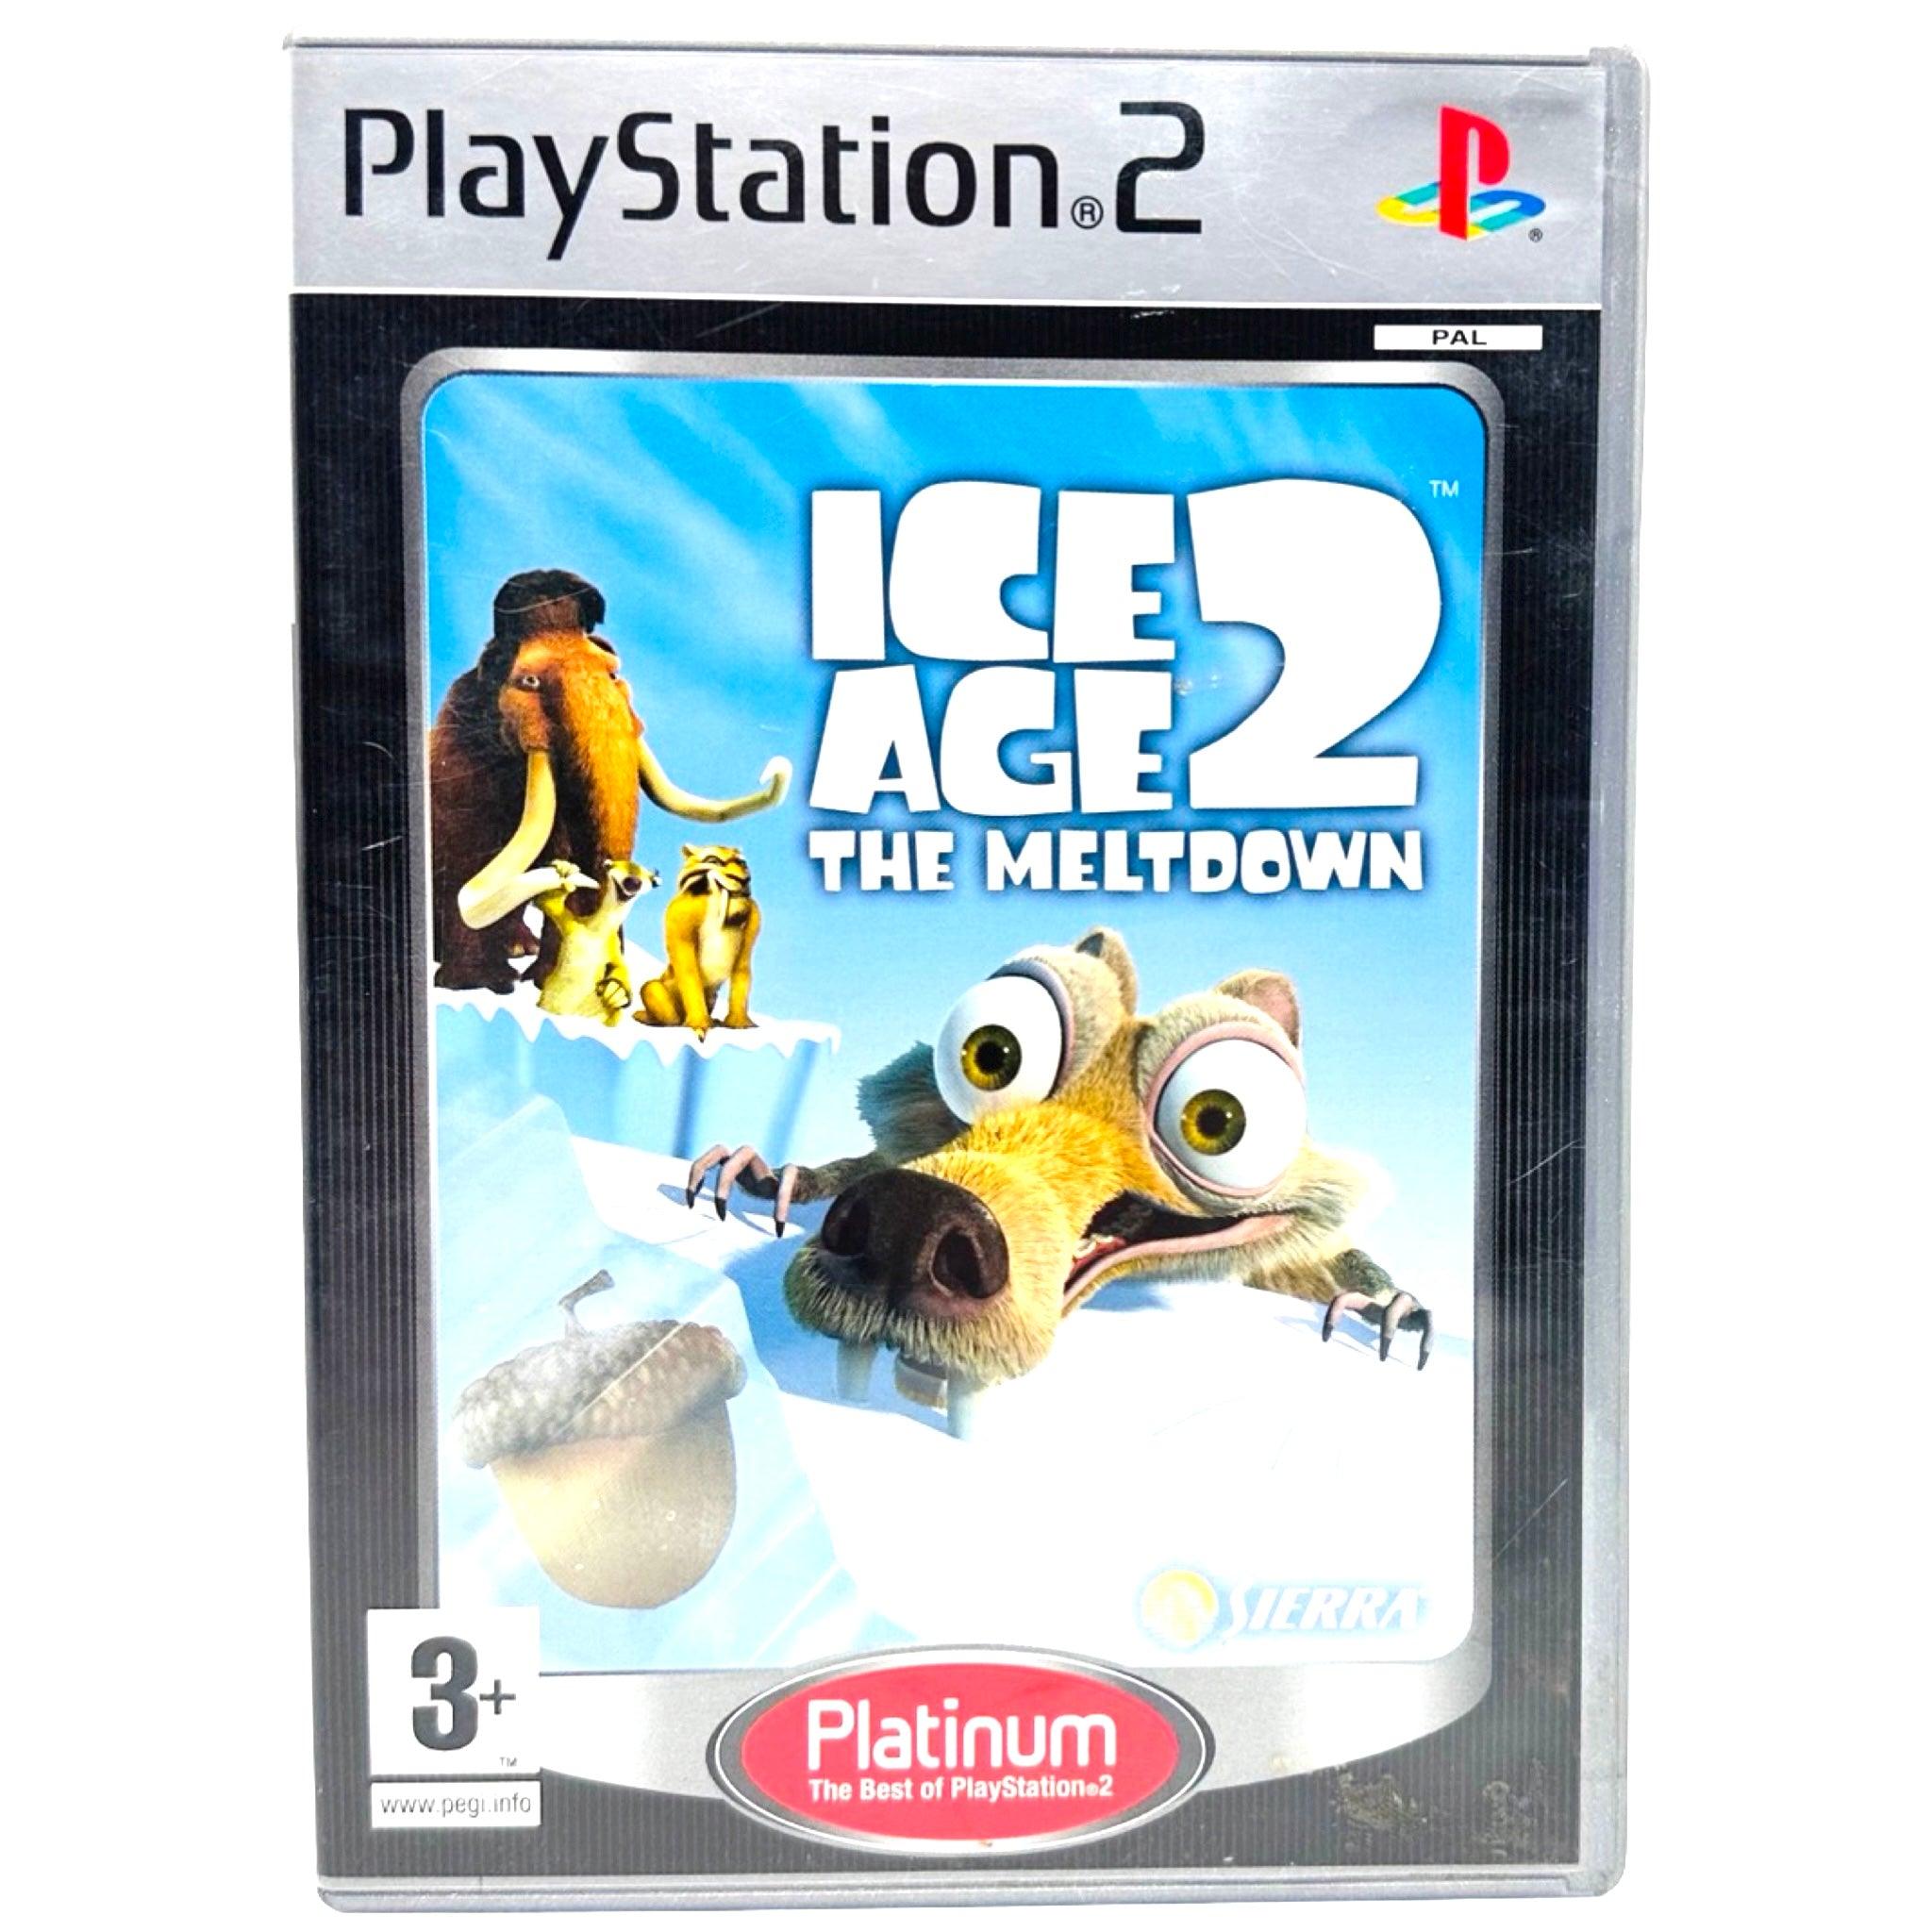 PS2: Ice Age 2 The Meltdown - RetroGaming.no